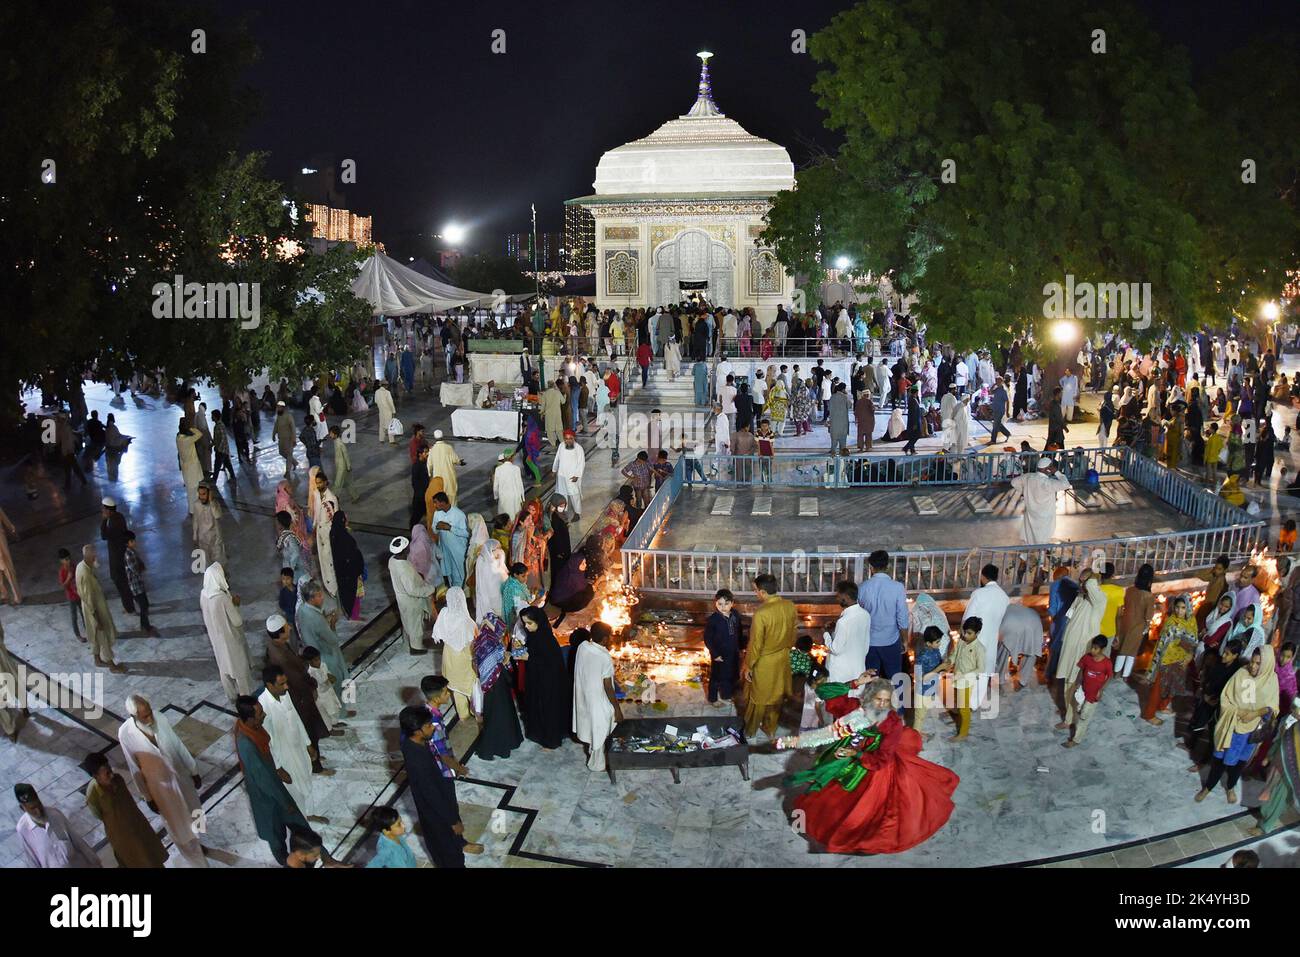 Pakistani Muslim devotees light candles earthen oil lamps and devotees (Malang) dance at the shrine of famous fifteenth century Sufi Saint Hazrat Mir Mohammed Muayyinul during 399th URS birth anniversary celebrations in Lahore. Thousands of people across the country visit the shrine to pay tribute to him during a three-day festival. The saint was equally popular among the Muslim and Sikh religions, as Mian Mir went to Amritsar (India) in December 1588 to lay the foundation stone of Sikh's holiest site, the Golden Temple, which is commonly known as Sri Harminder Sahib. (Photo by Rana Sajid Huss Stock Photo